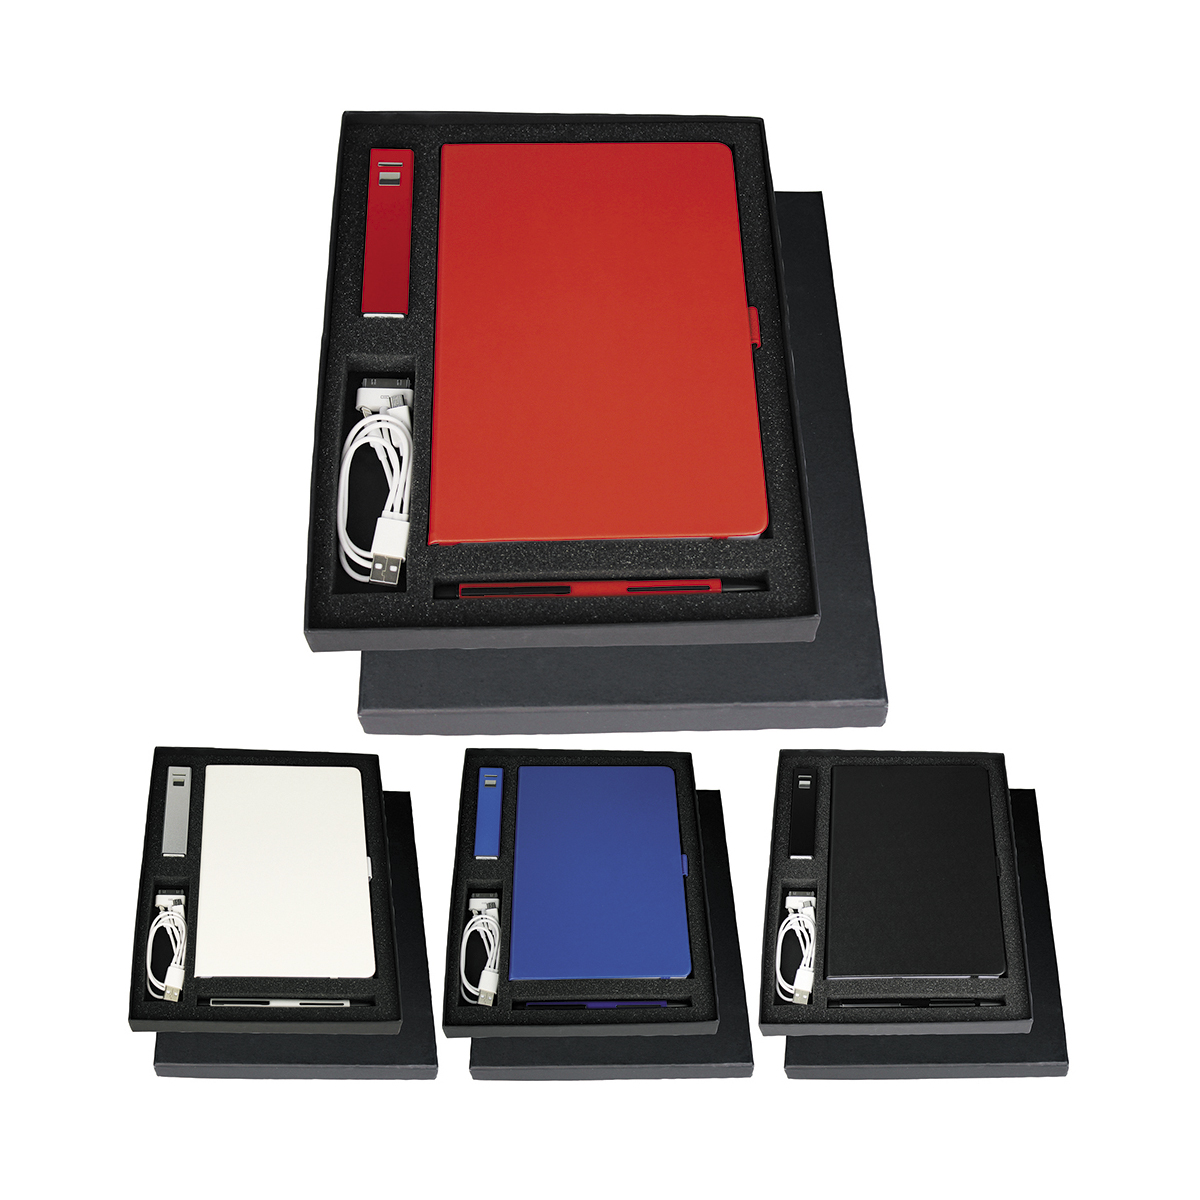 elevate journal gift set with charger, usb stick and pen